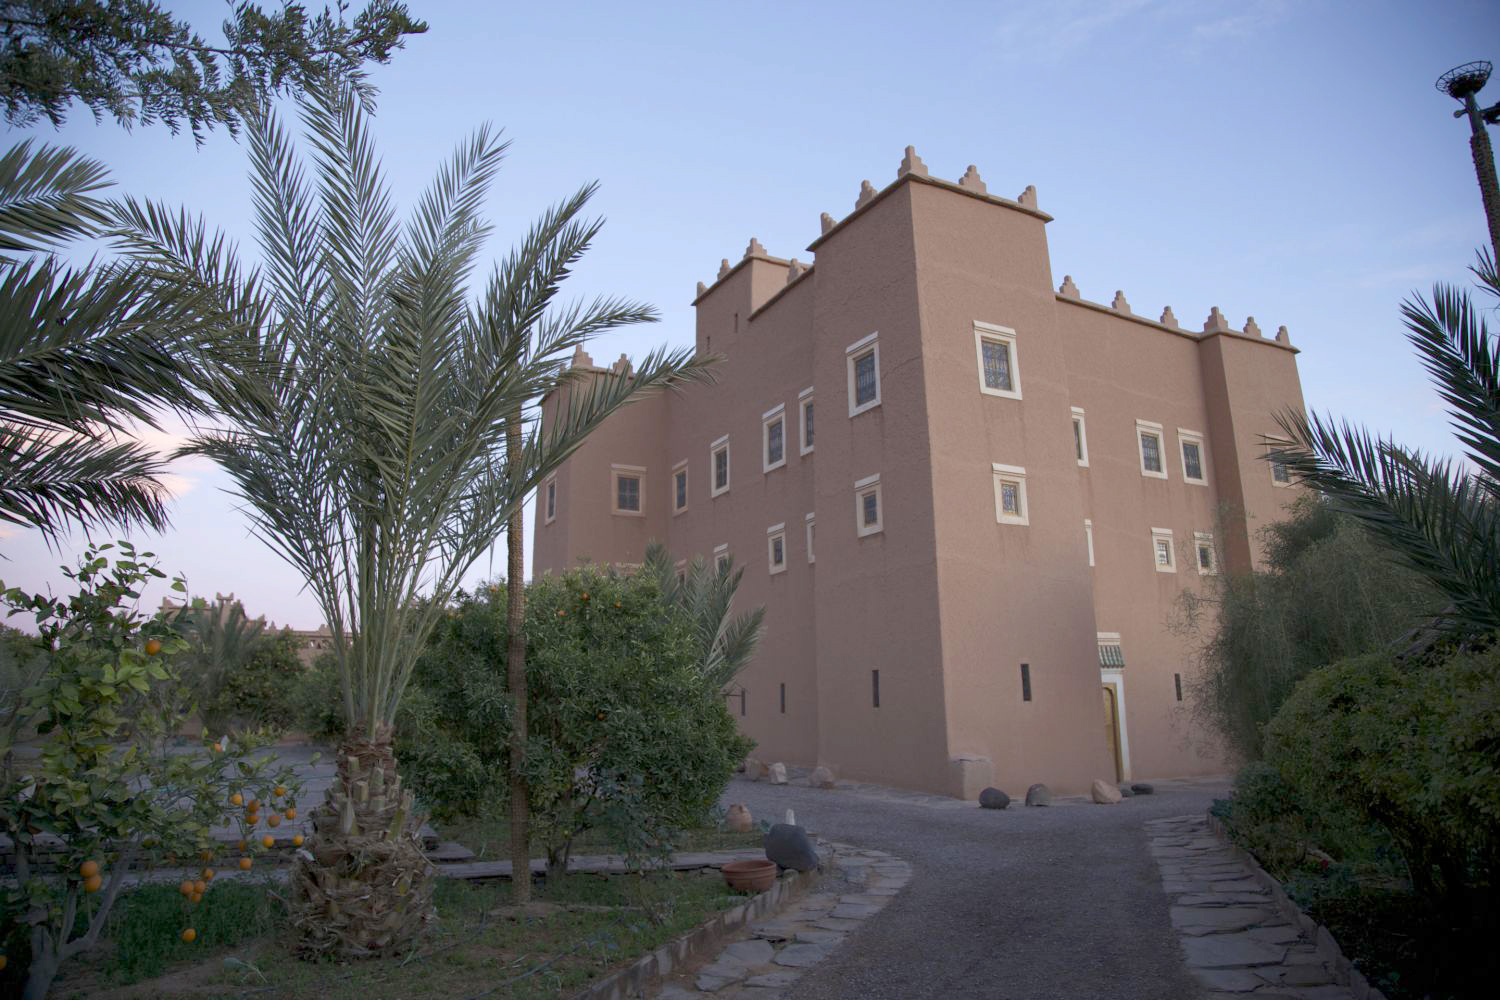 View to north, corner view of casbah from the entrance drive